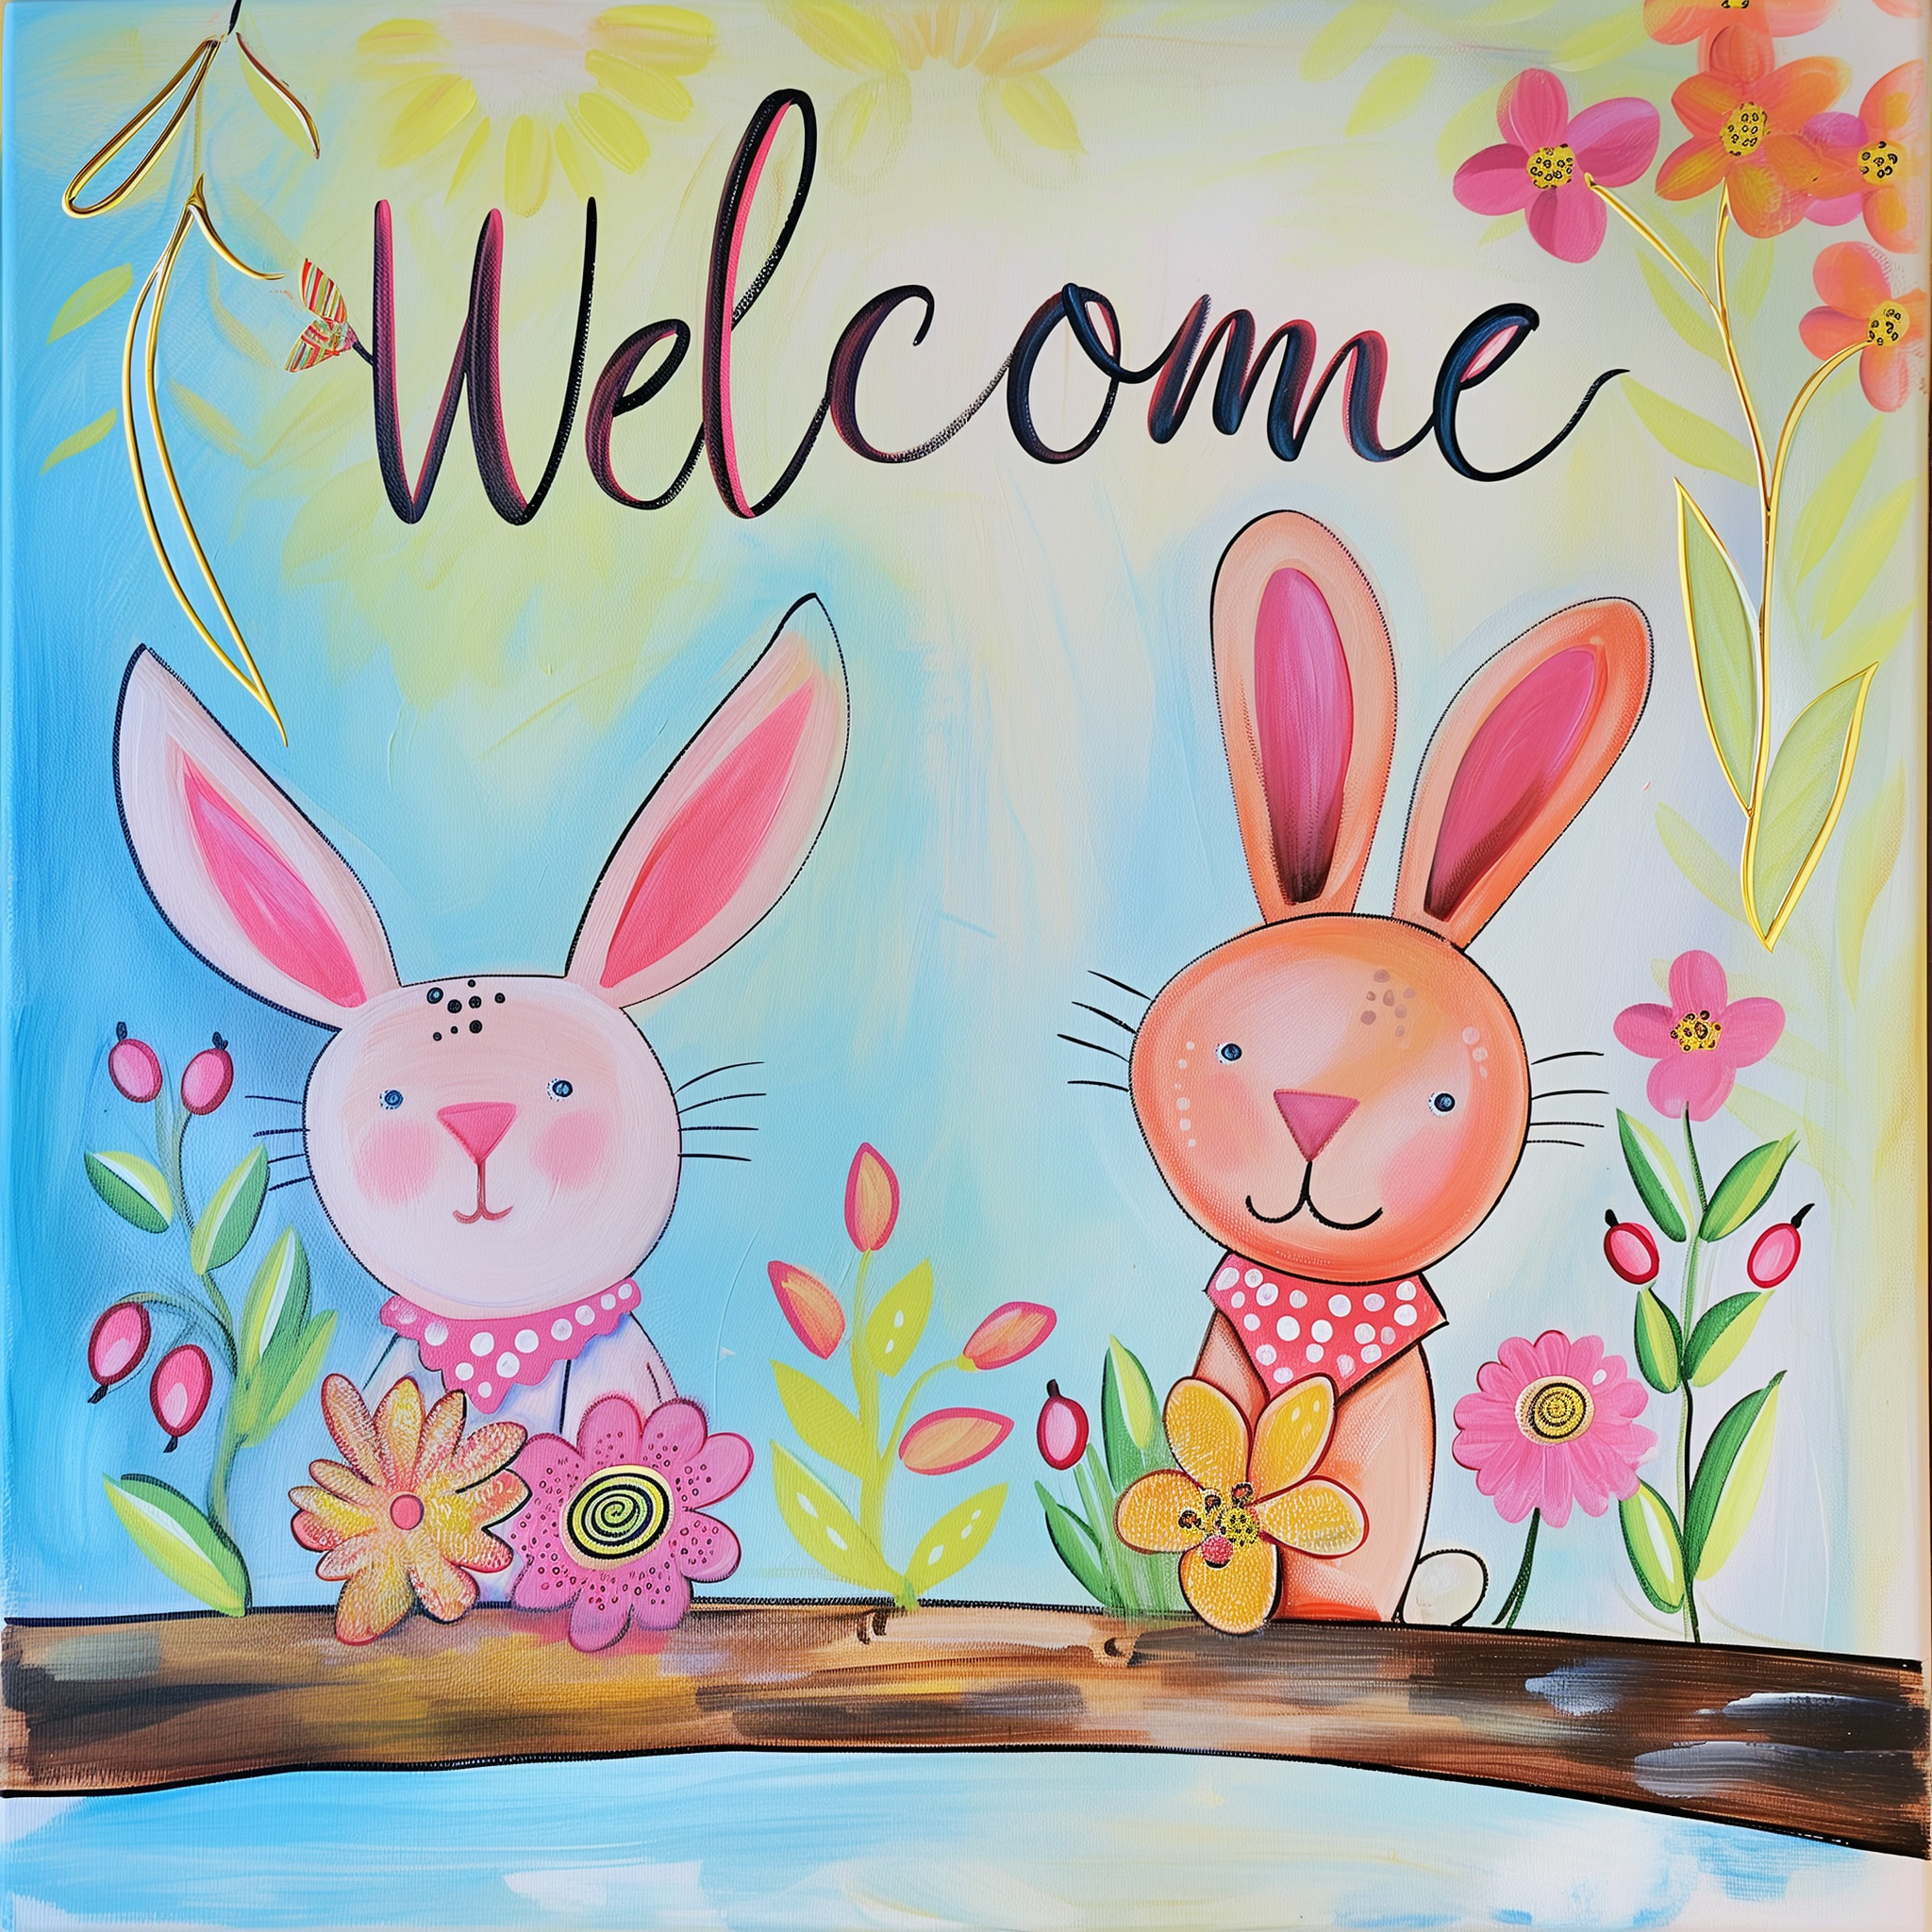 Colorful welcome drawing with adorable cartoon bunnies and floral accents for a cheerful avatar or profile picture.